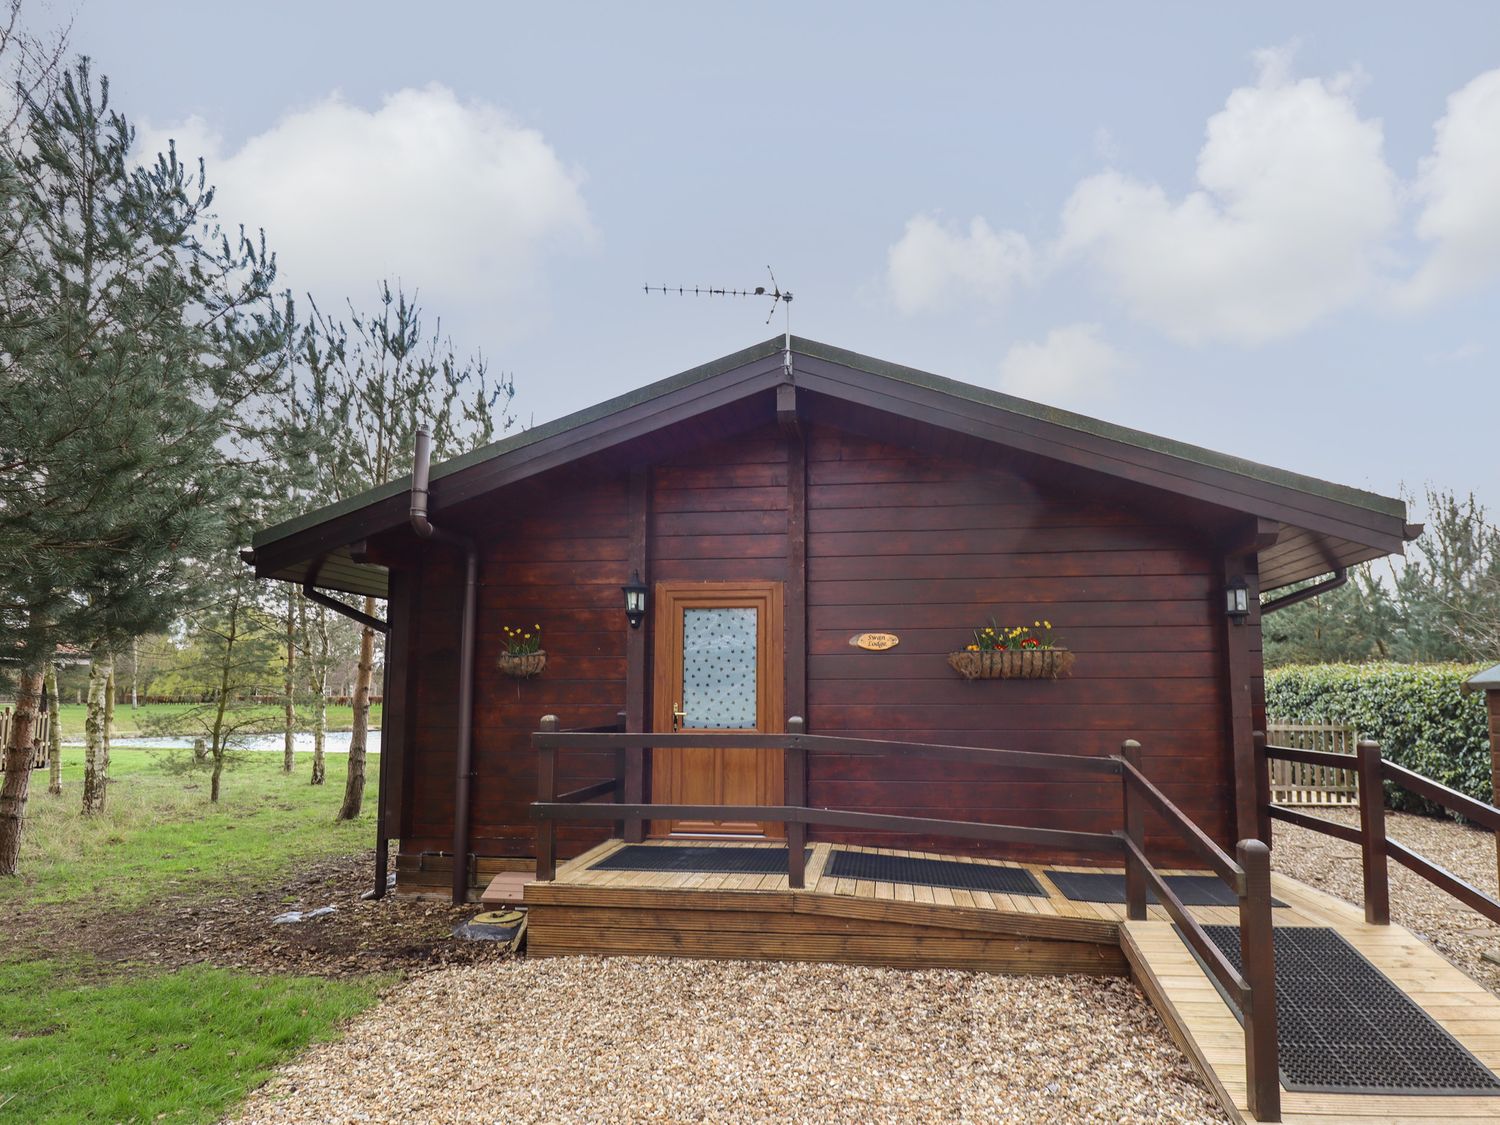 Swan Lodge in Stainfield, Bardney, Lincolnshire, sleeps two guests in one bedroom. One dog, hot tub.